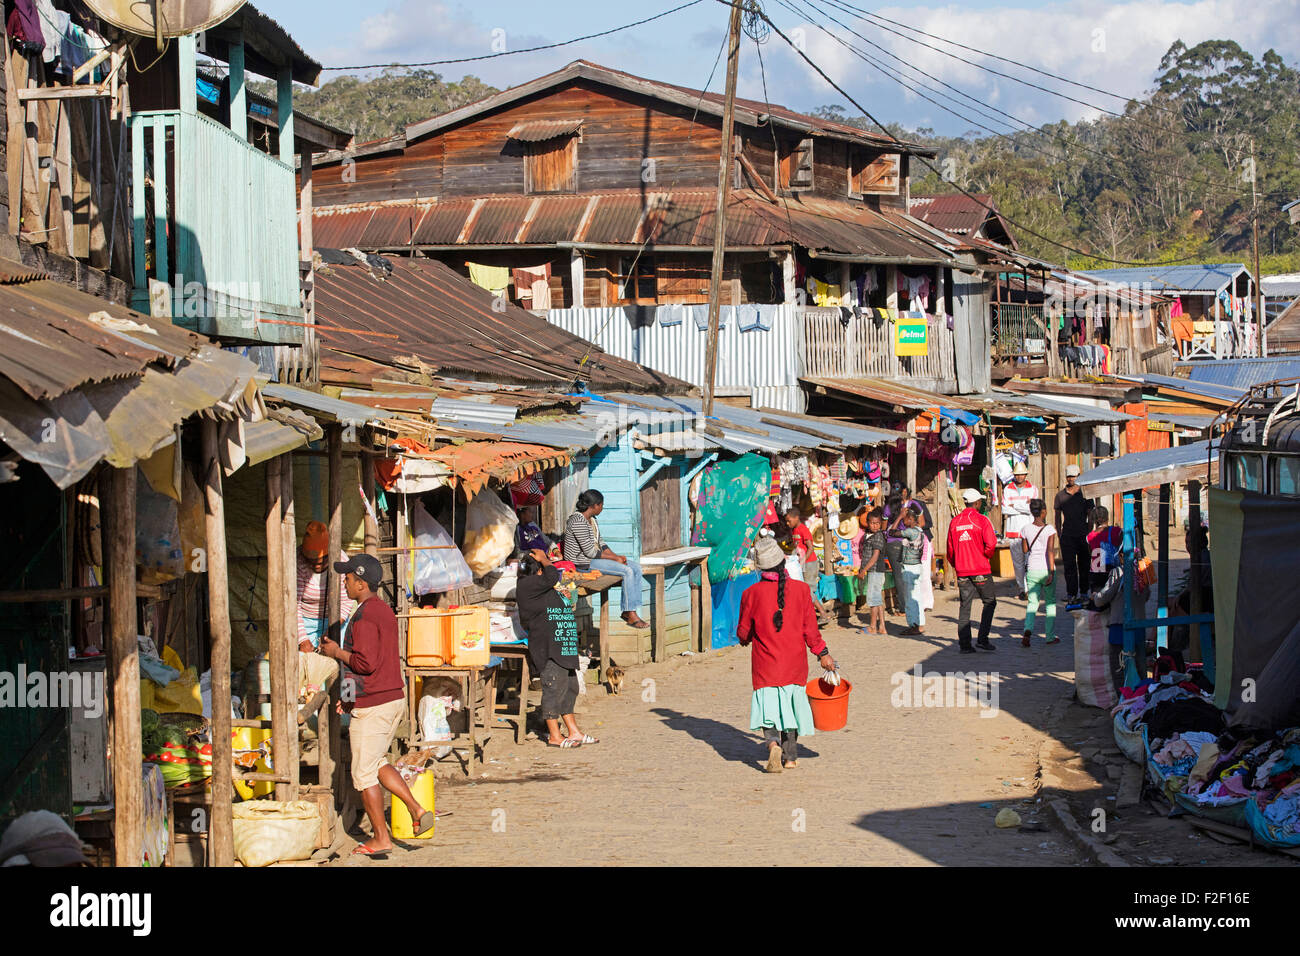 Malagasy people shopping in the main street of the town Andasibe, Alaotra-Mangoro, Madagascar, Southeast Africa Stock Photo